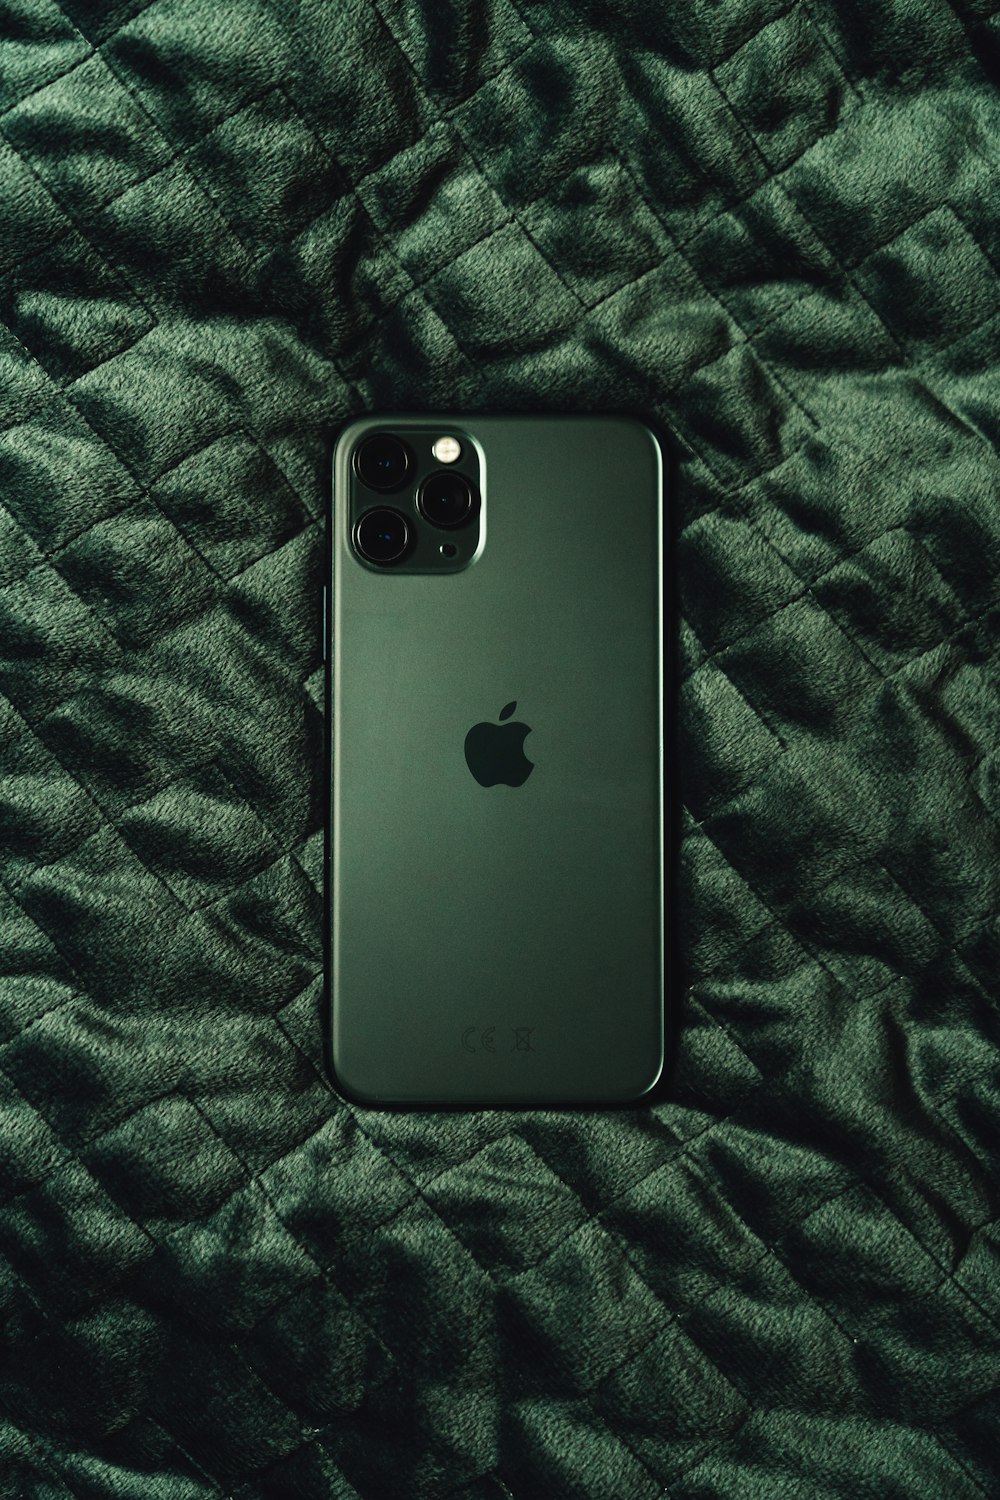 black iphone 7 plus on black and white textile